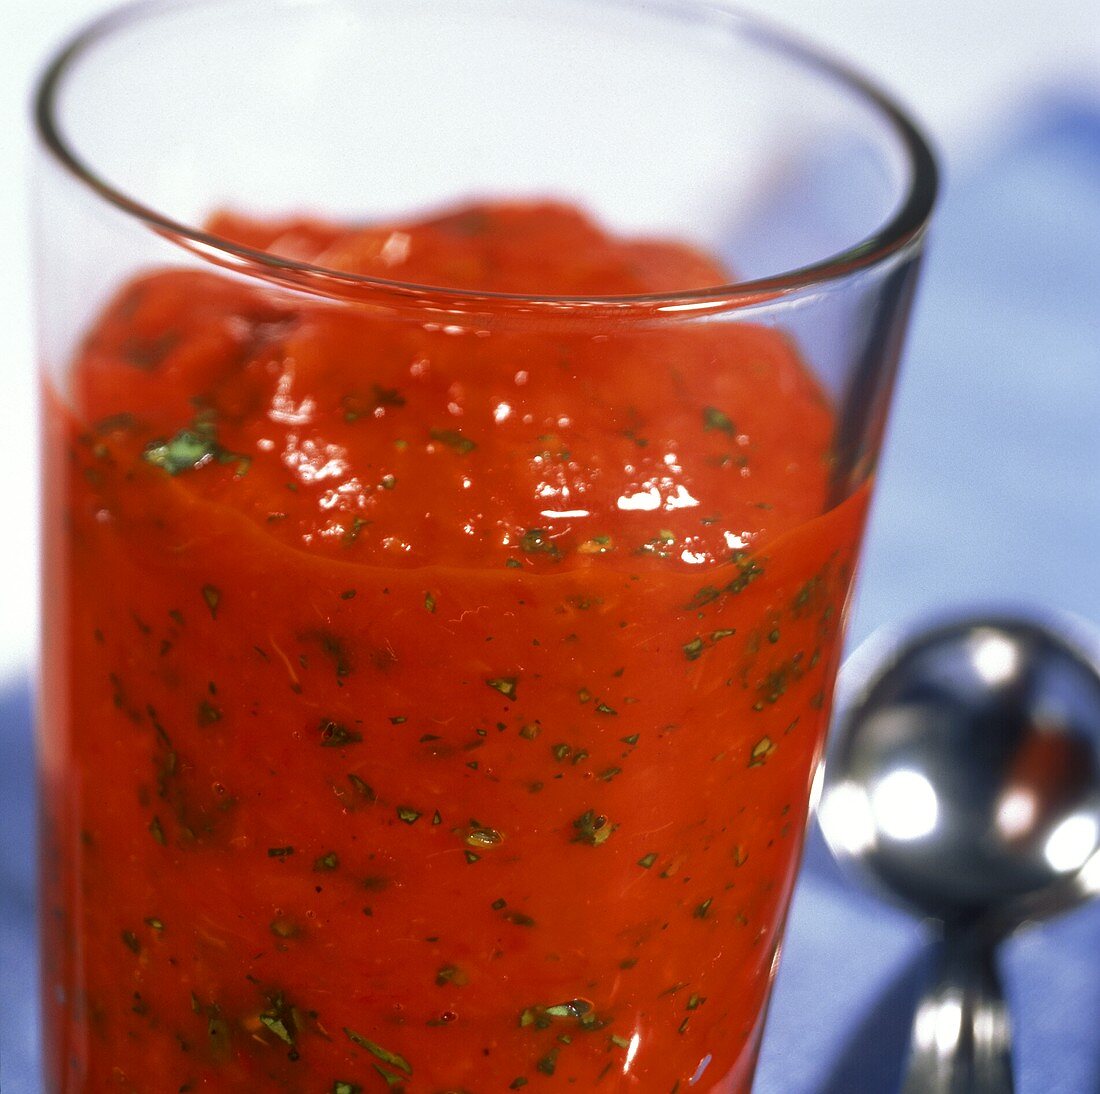 Home-made tomato ketchup in glass